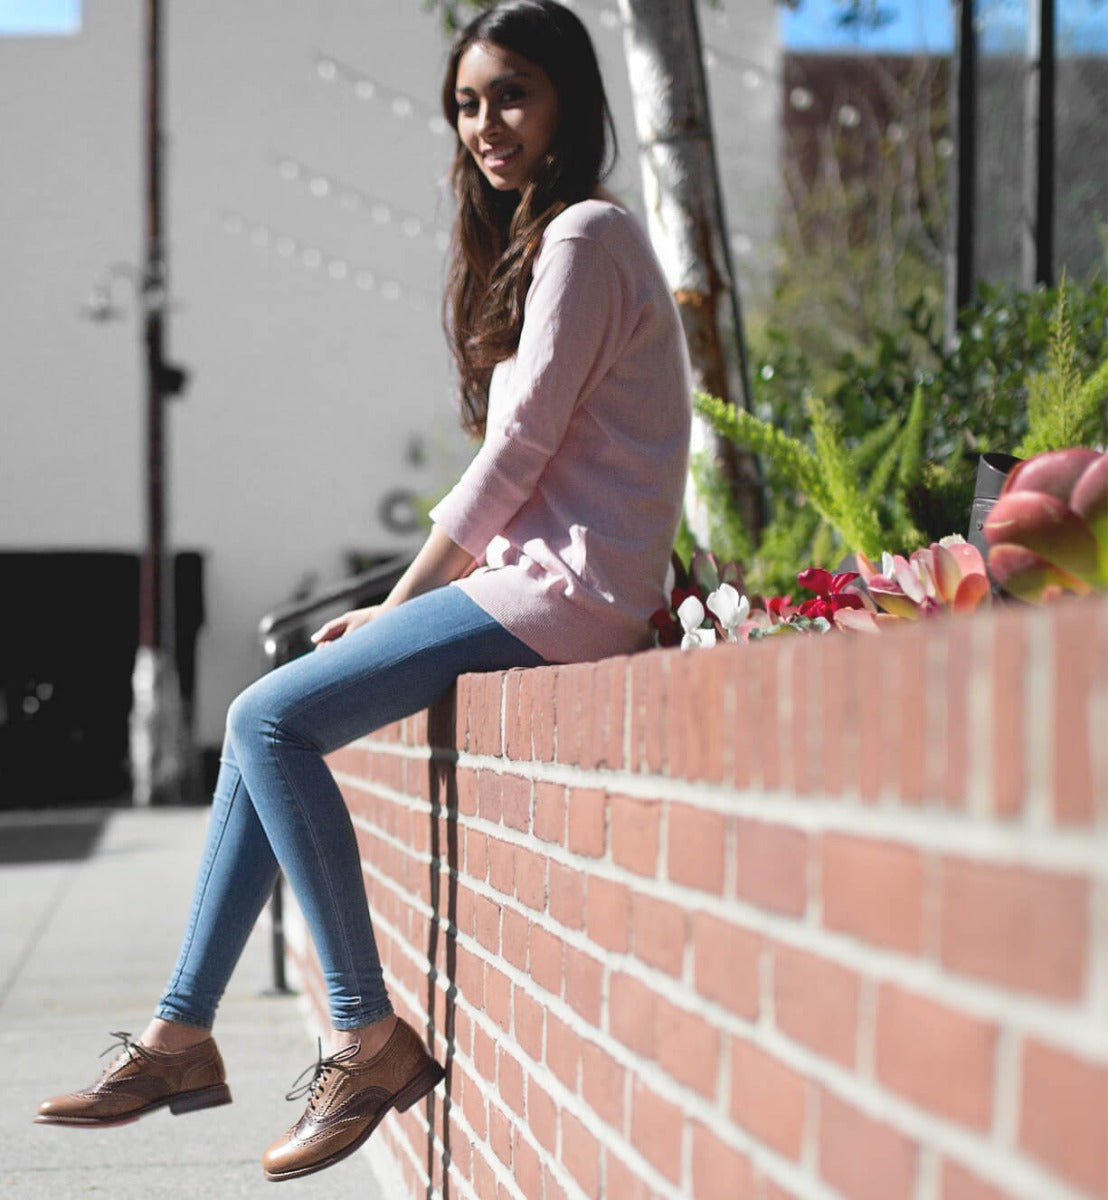 A woman sitting on a brick wall wearing brown Bed Stu Lita shoes and a pink sweater.